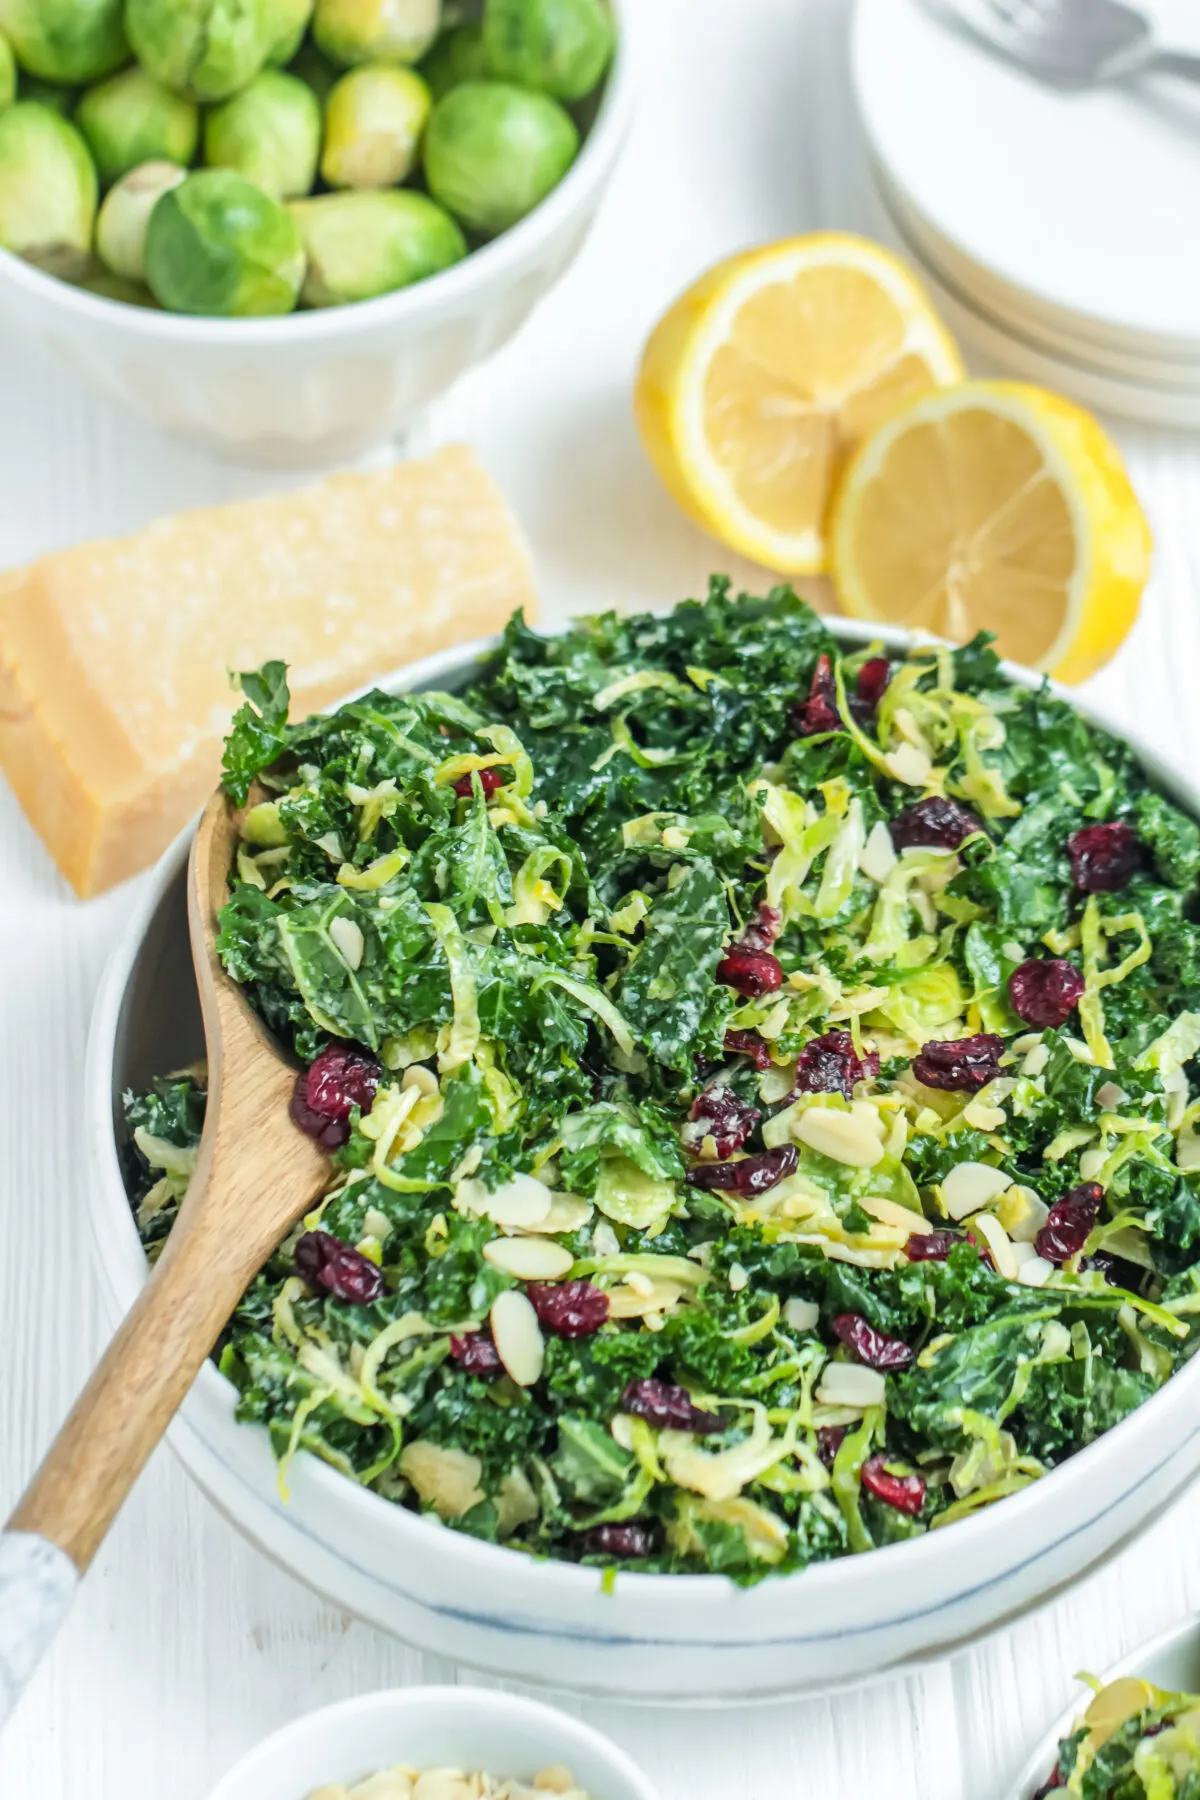 This delicious kale and Brussels sprout salad recipe is perfect for a healthy side dish or light lunch that is perfect for any occasion!